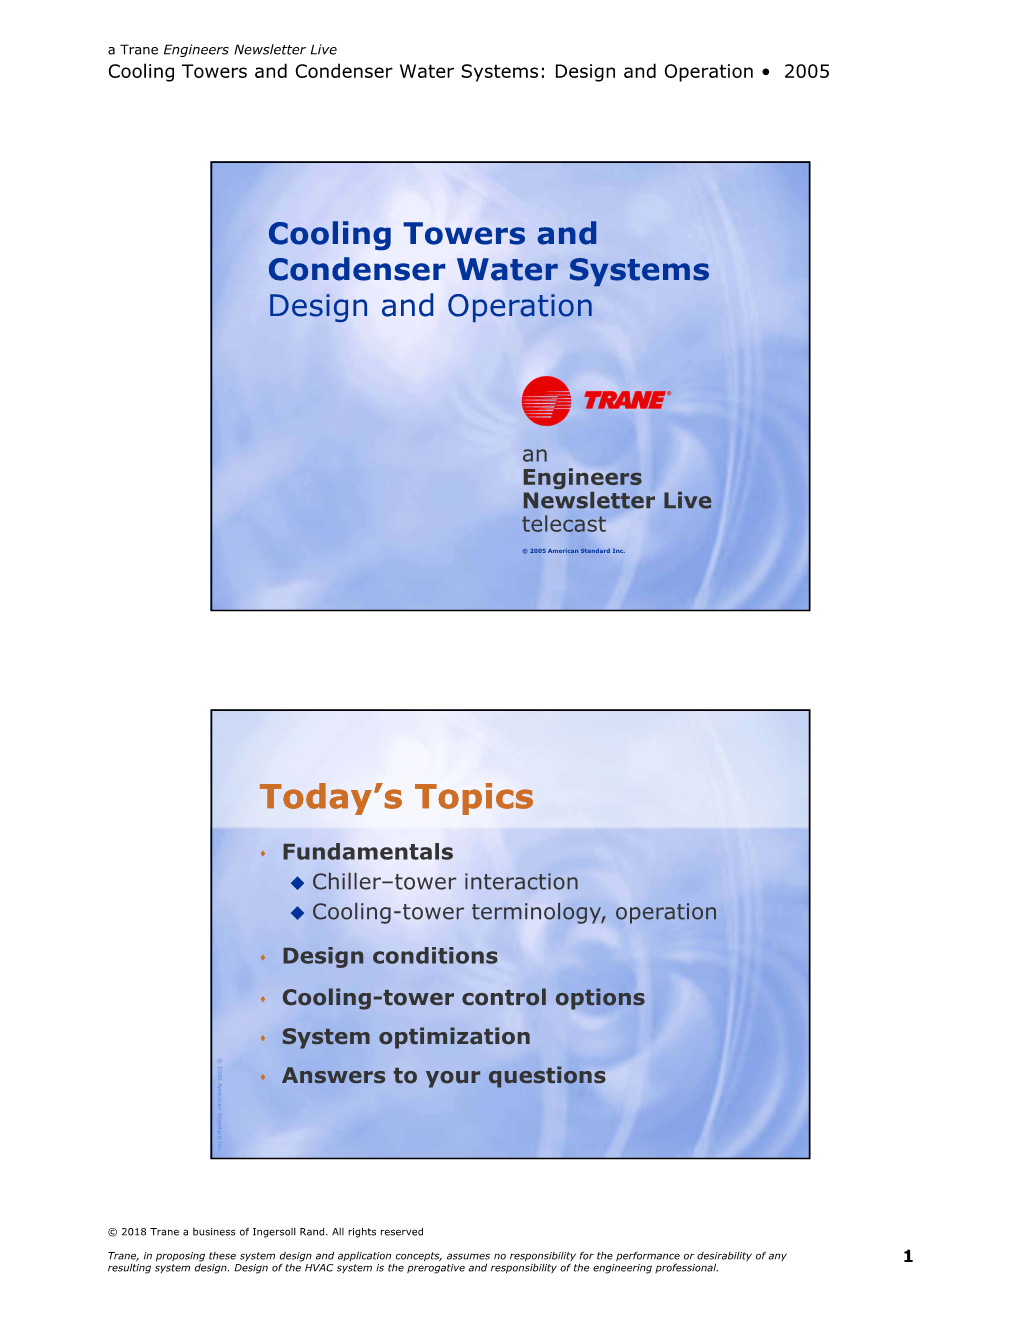 Cooling Towers and Condenser Water Systems Design and Operation